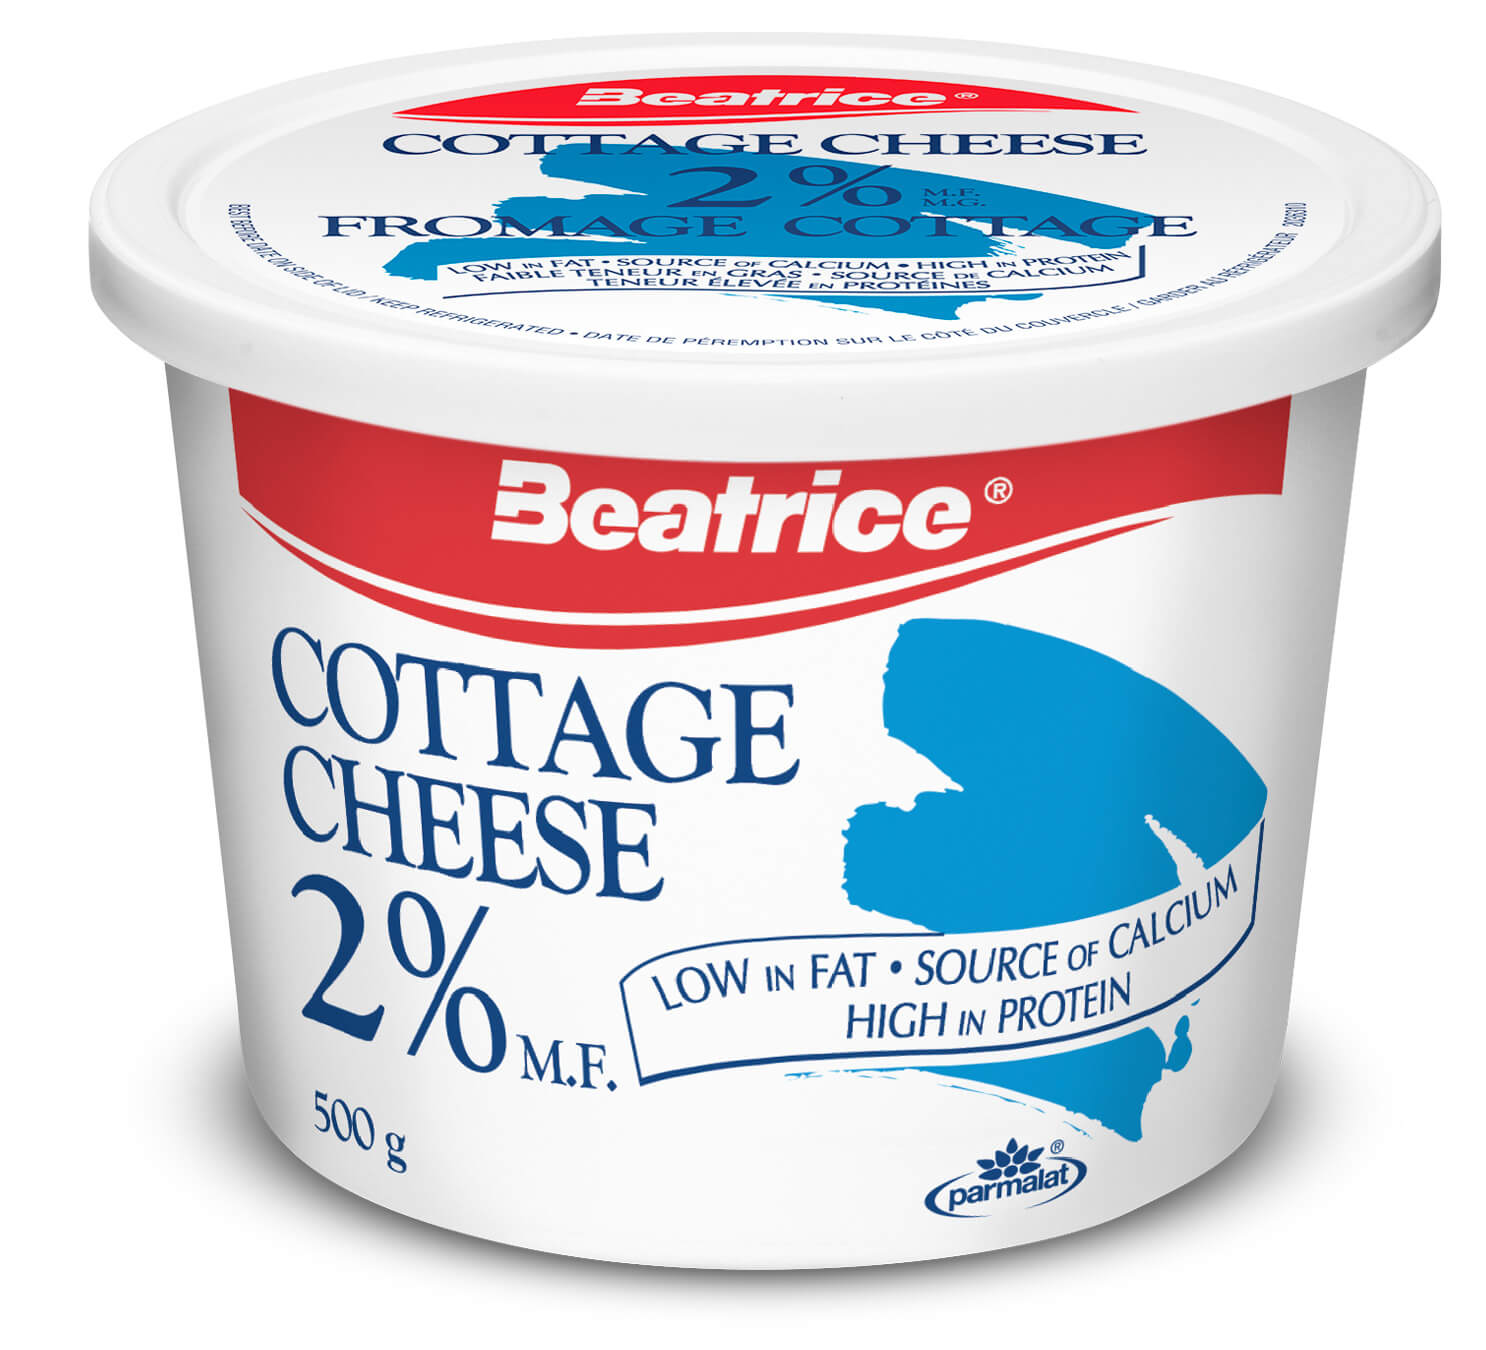 Beatrice West 2 Cottage Cheese 500g